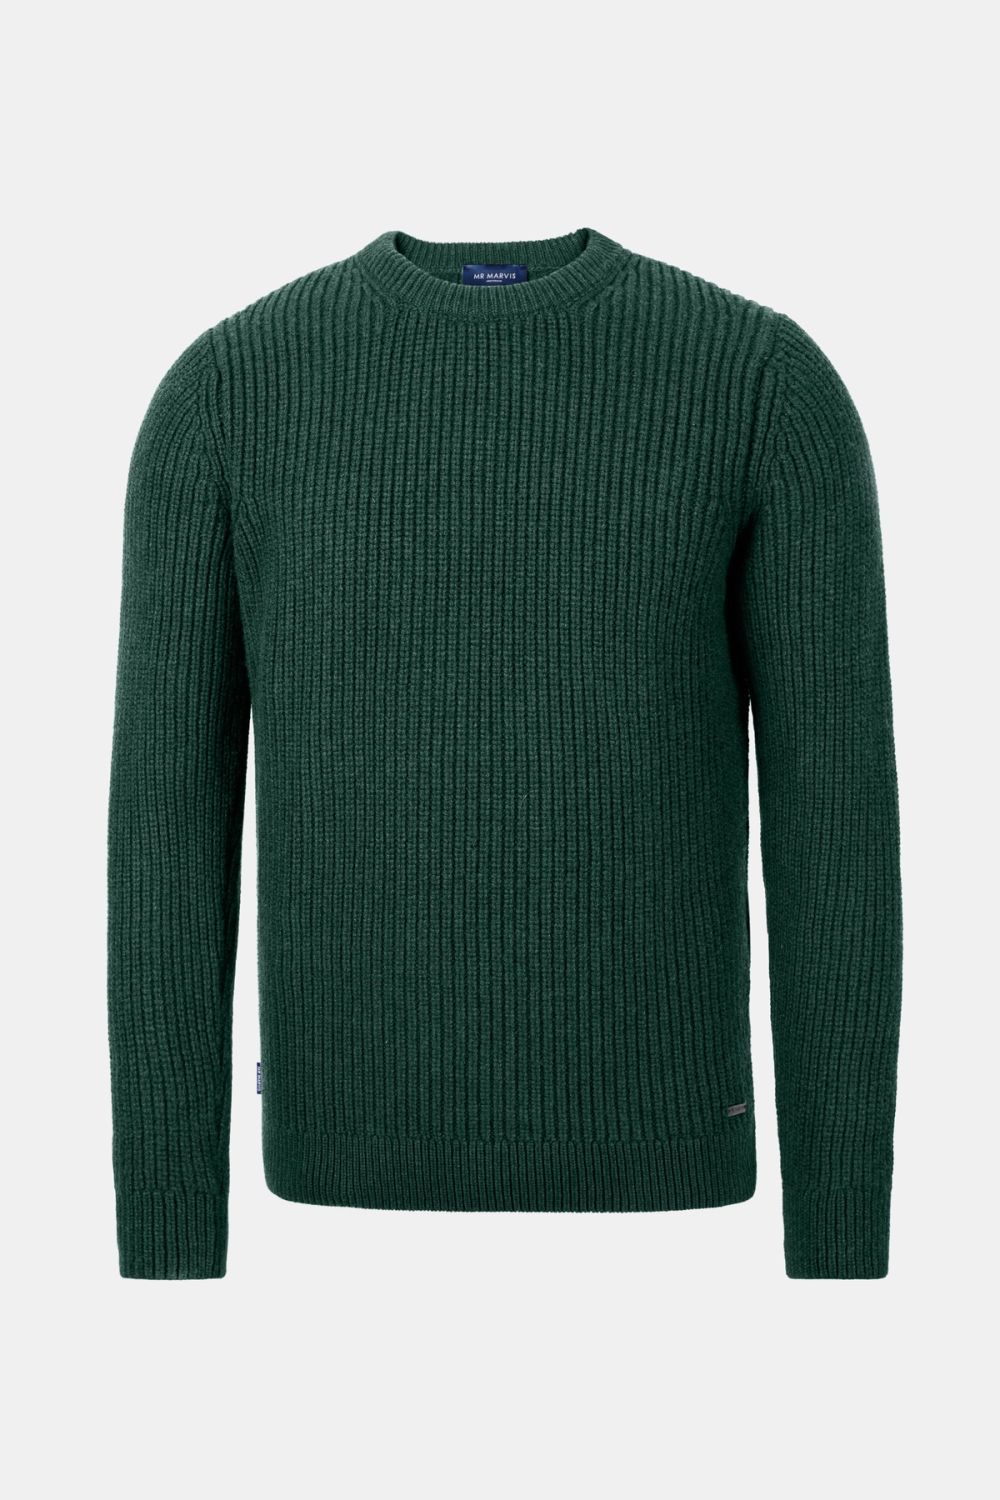 Lakes - The Knit Pullover